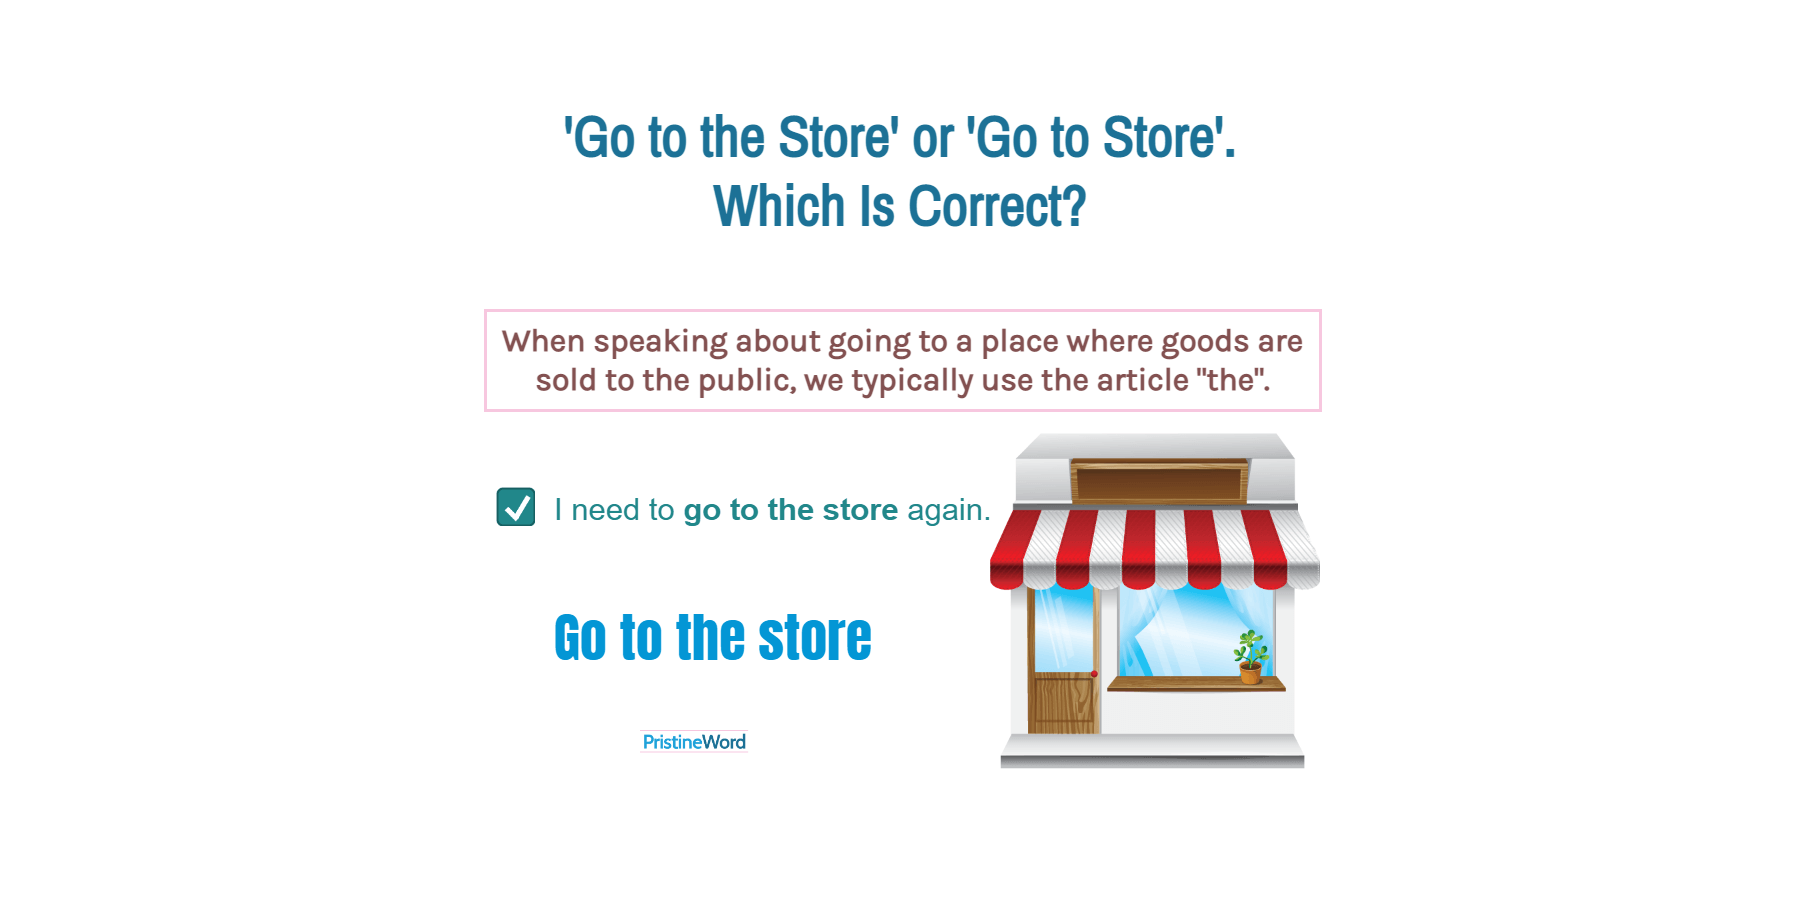 'Go to the Store' or 'Go to Store'. Which is correct?